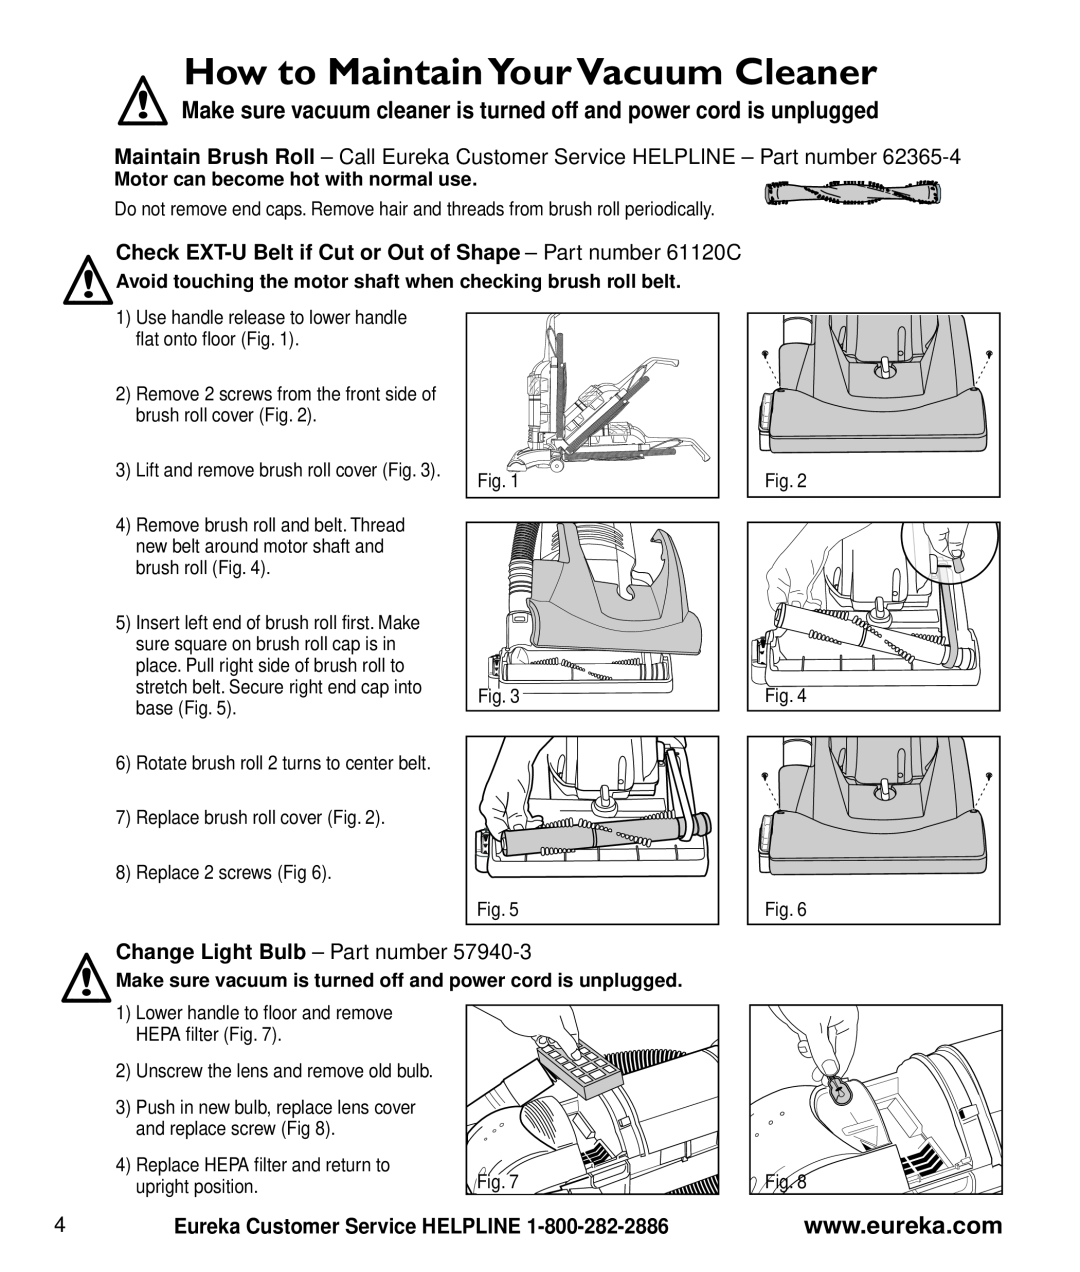 Eureka 2997-2999 Series How to MaintainYour Vacuum Cleaner, Check EXT-U Belt if Cut or Out of Shape - Part number 61120C 